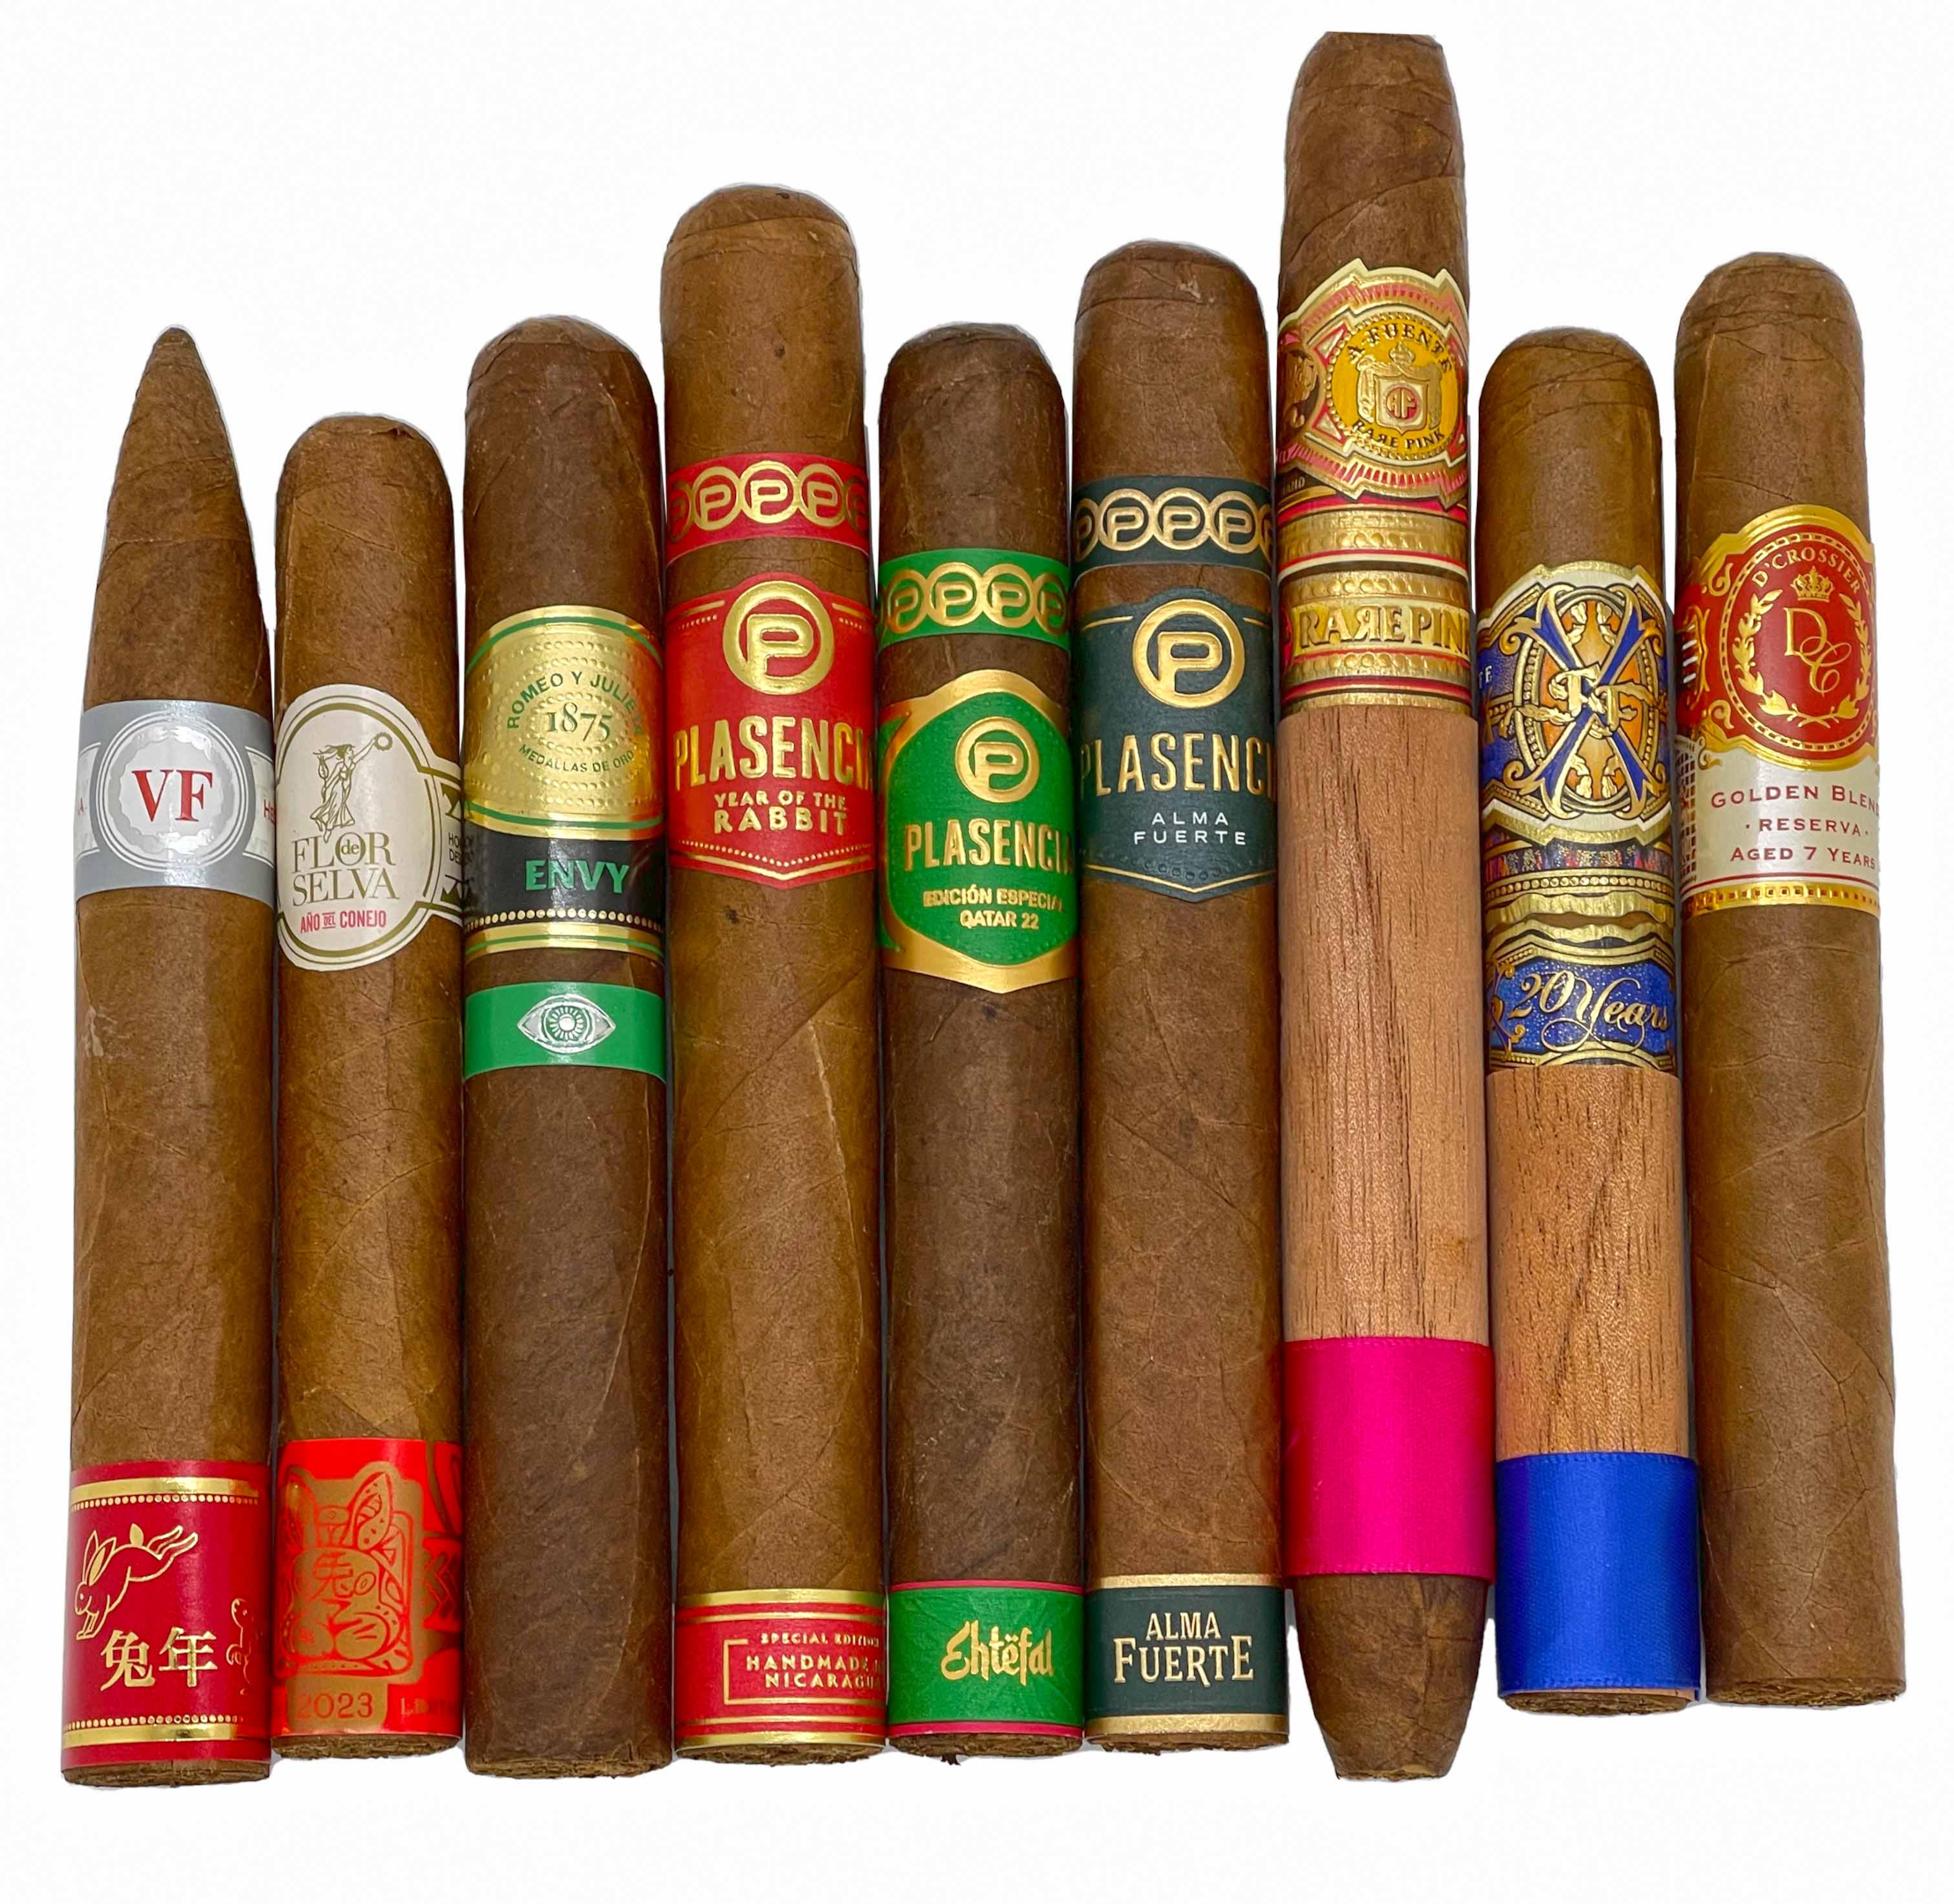 A variety of unique cigar flavors